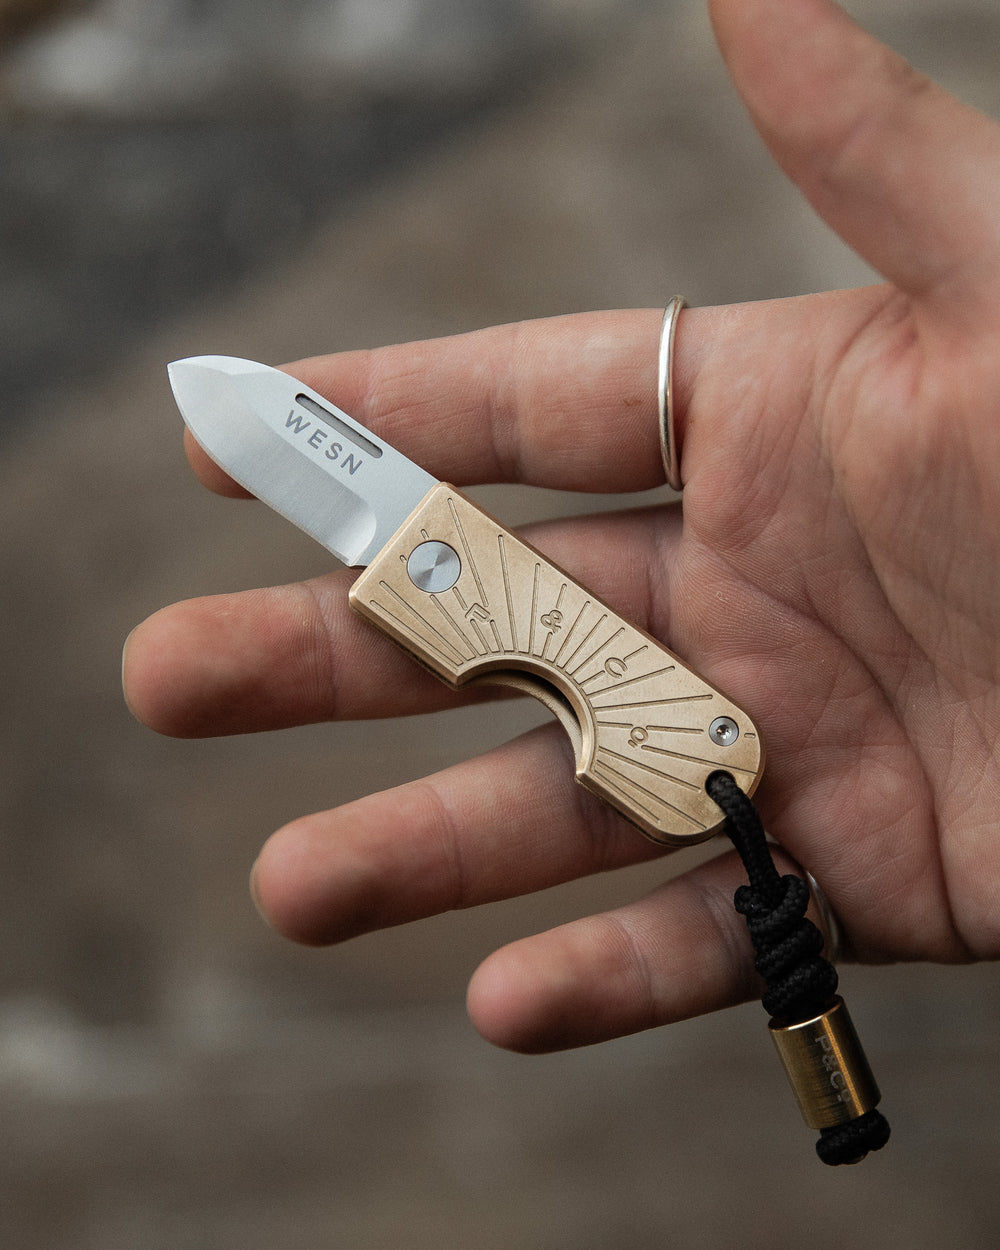 P&Co x WESN Slipjoint Microblade